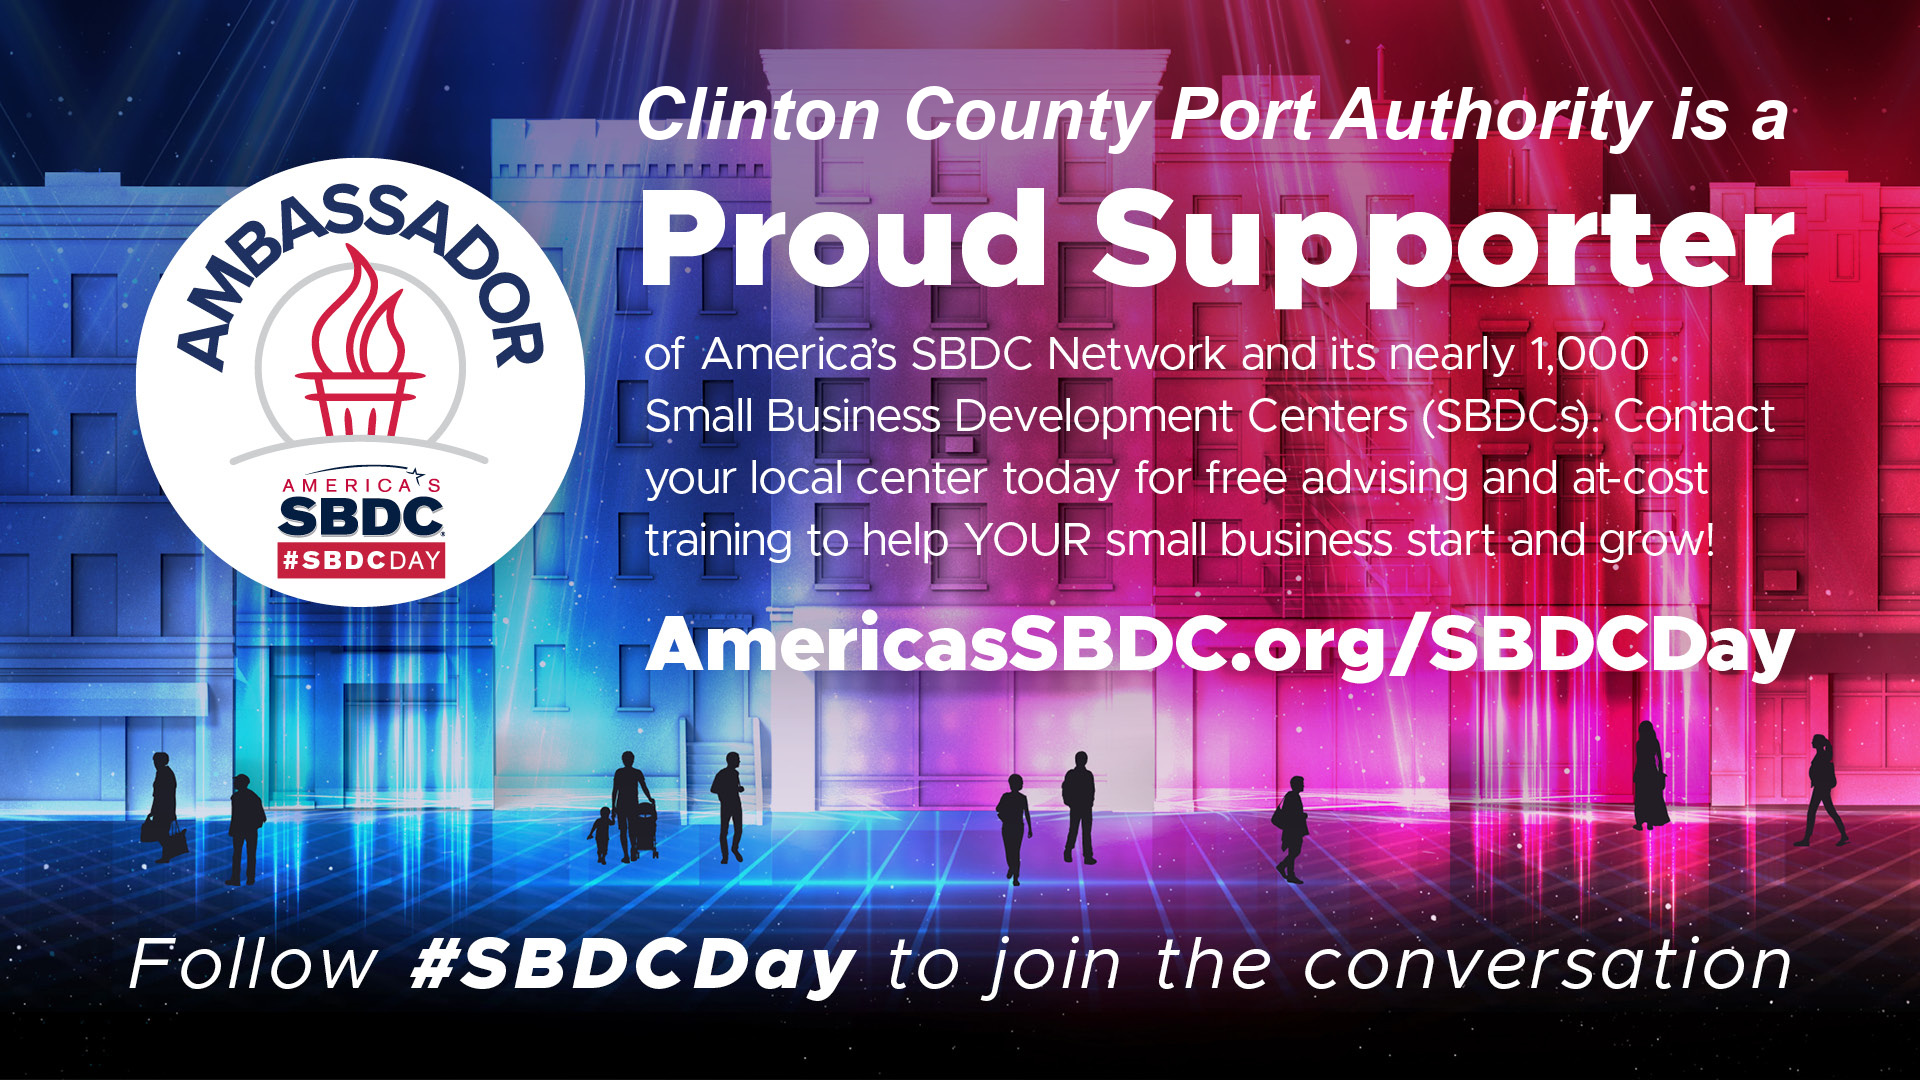 Clinton County Port Authority is Proud to be an SBDC Ambassador for a Third Year Photo